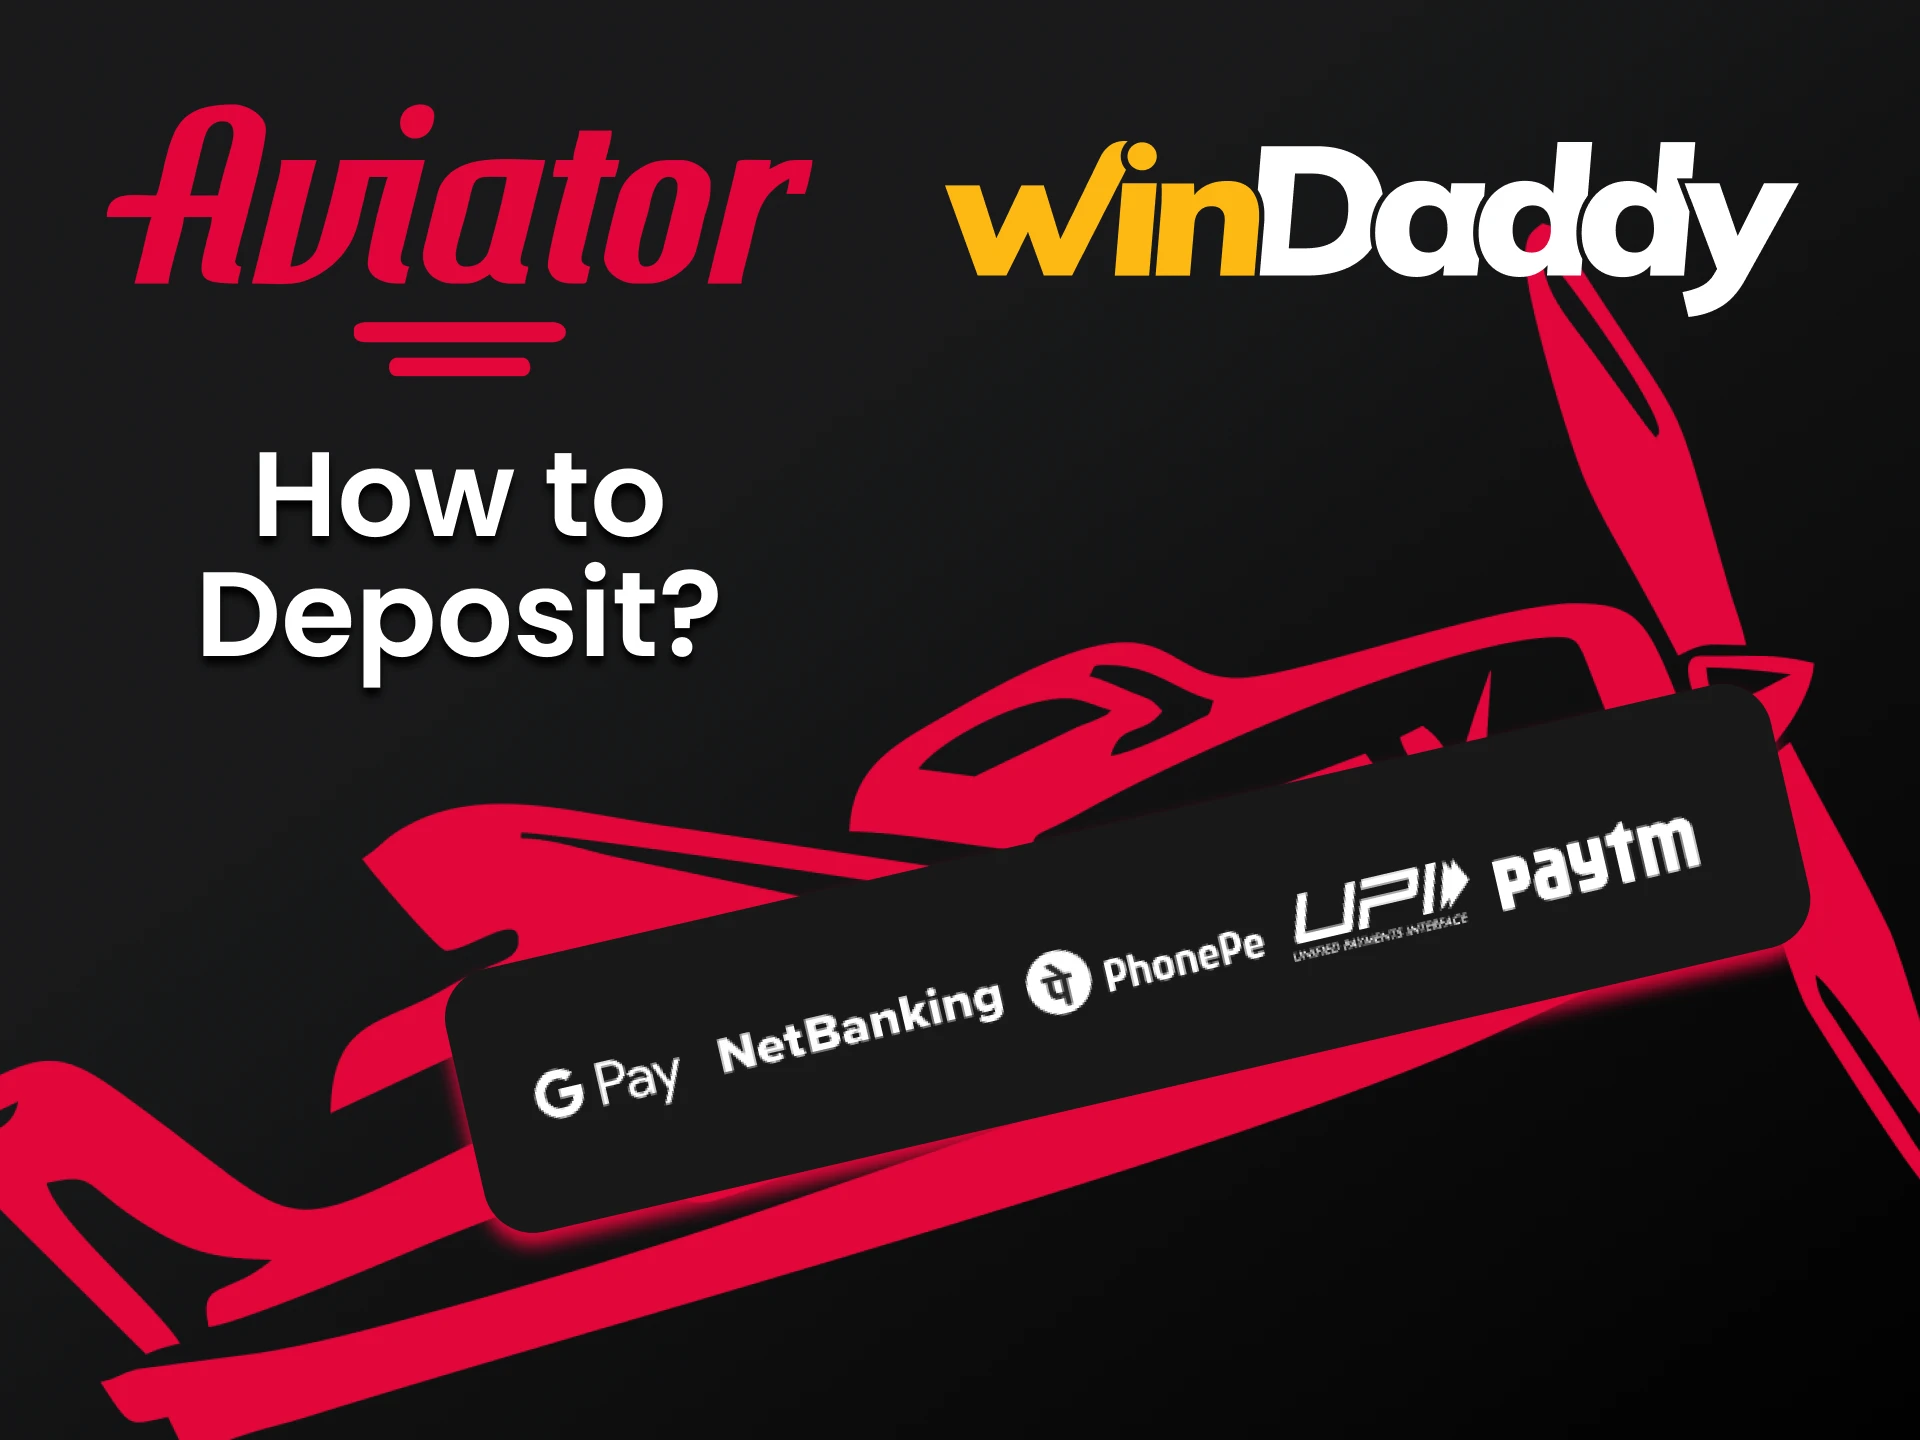 Find out how you can top up your funds on WinDaddy.